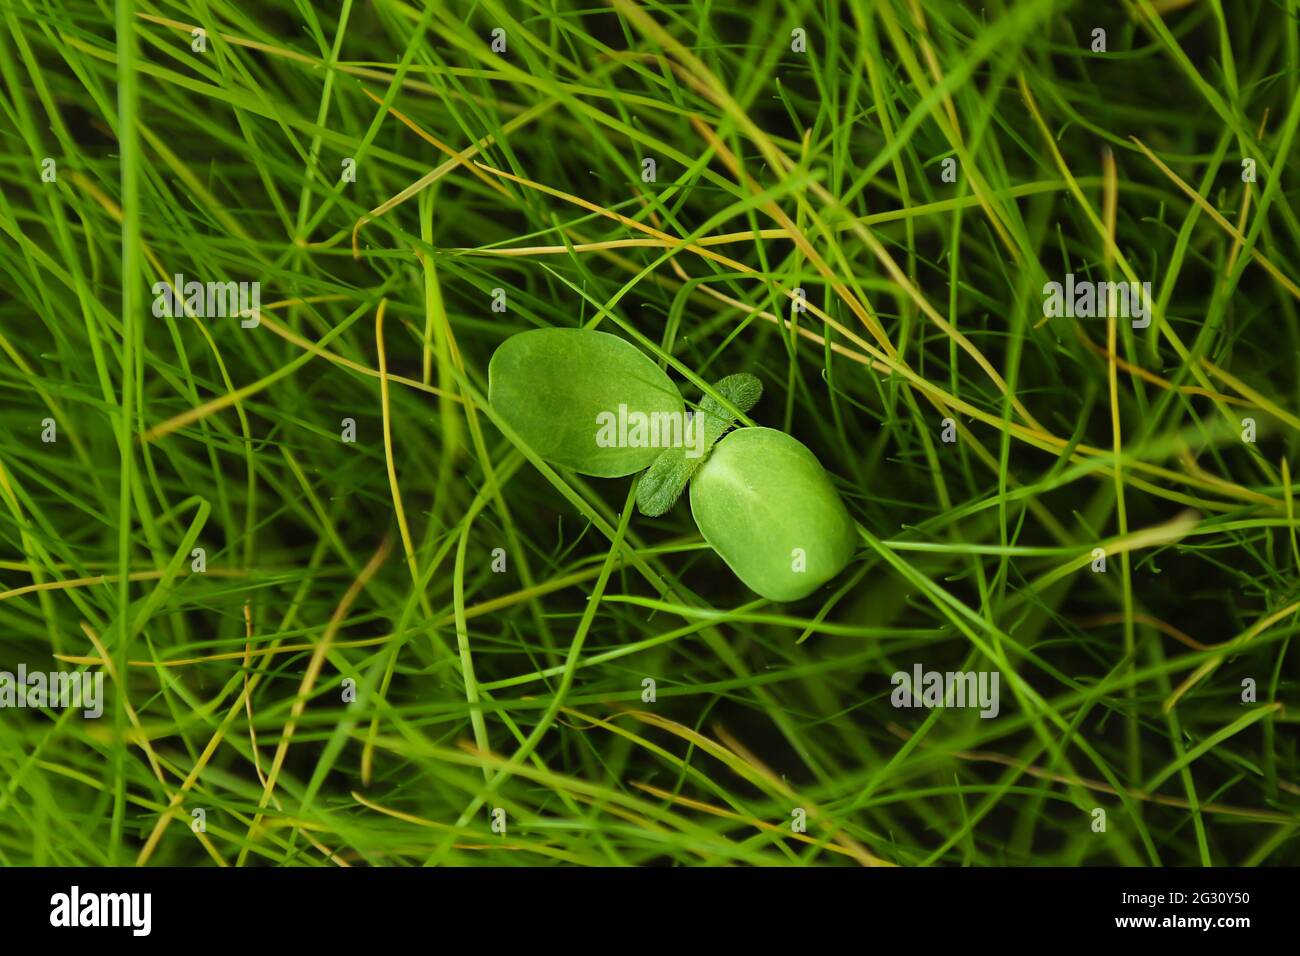 there was a small sprout growing on the green lawn. Concept: against all expectations. Stock Photo